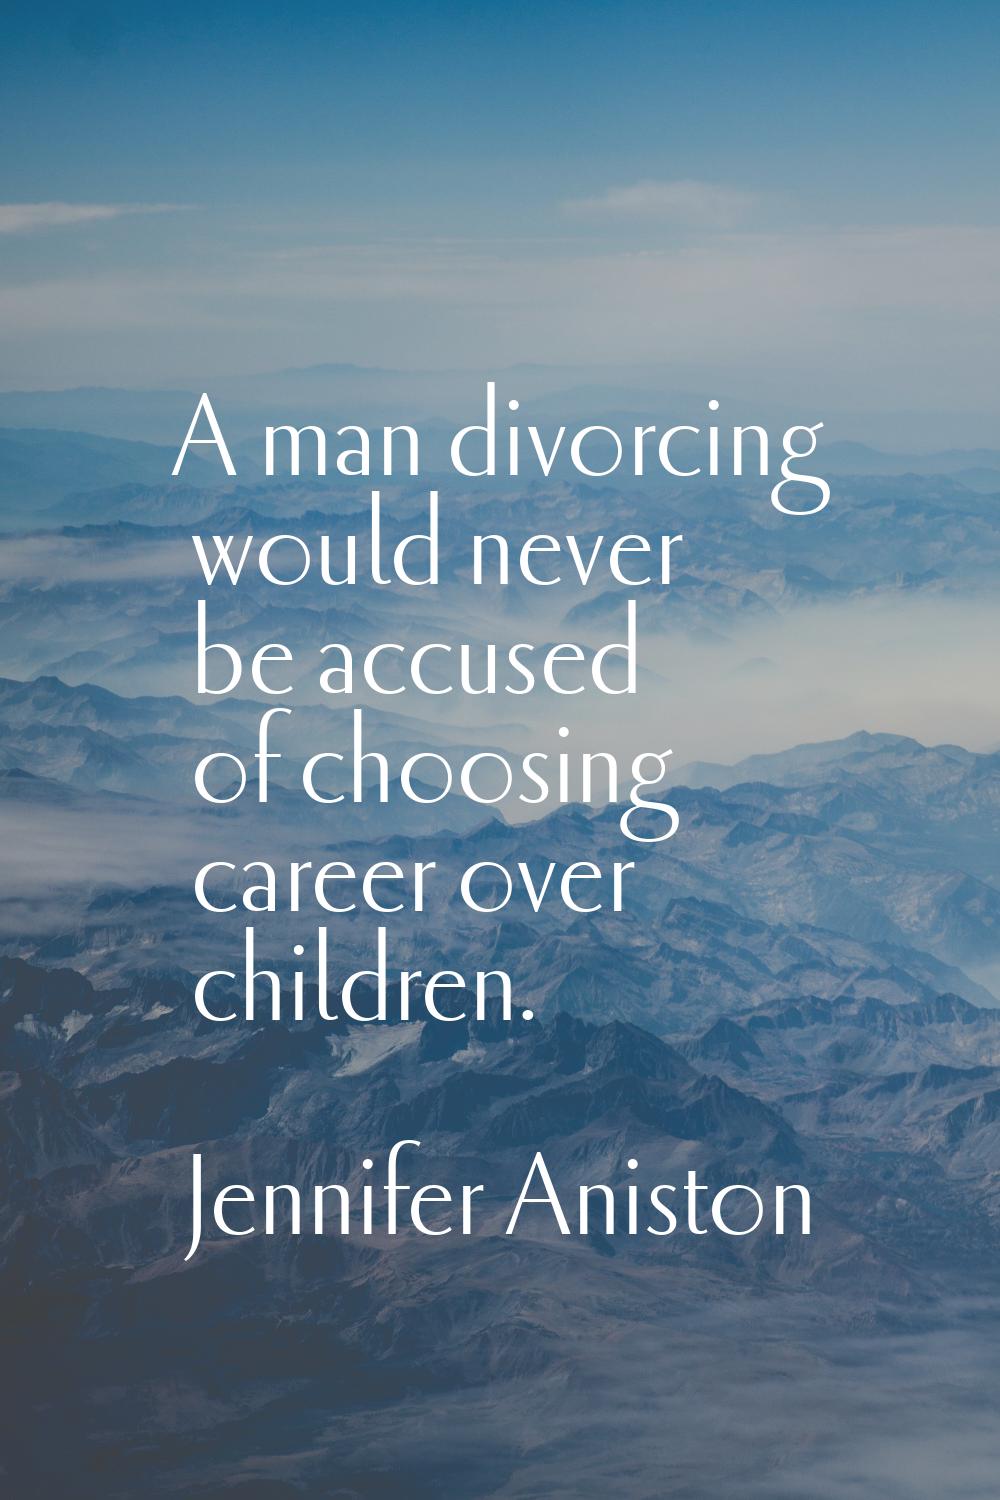 A man divorcing would never be accused of choosing career over children.